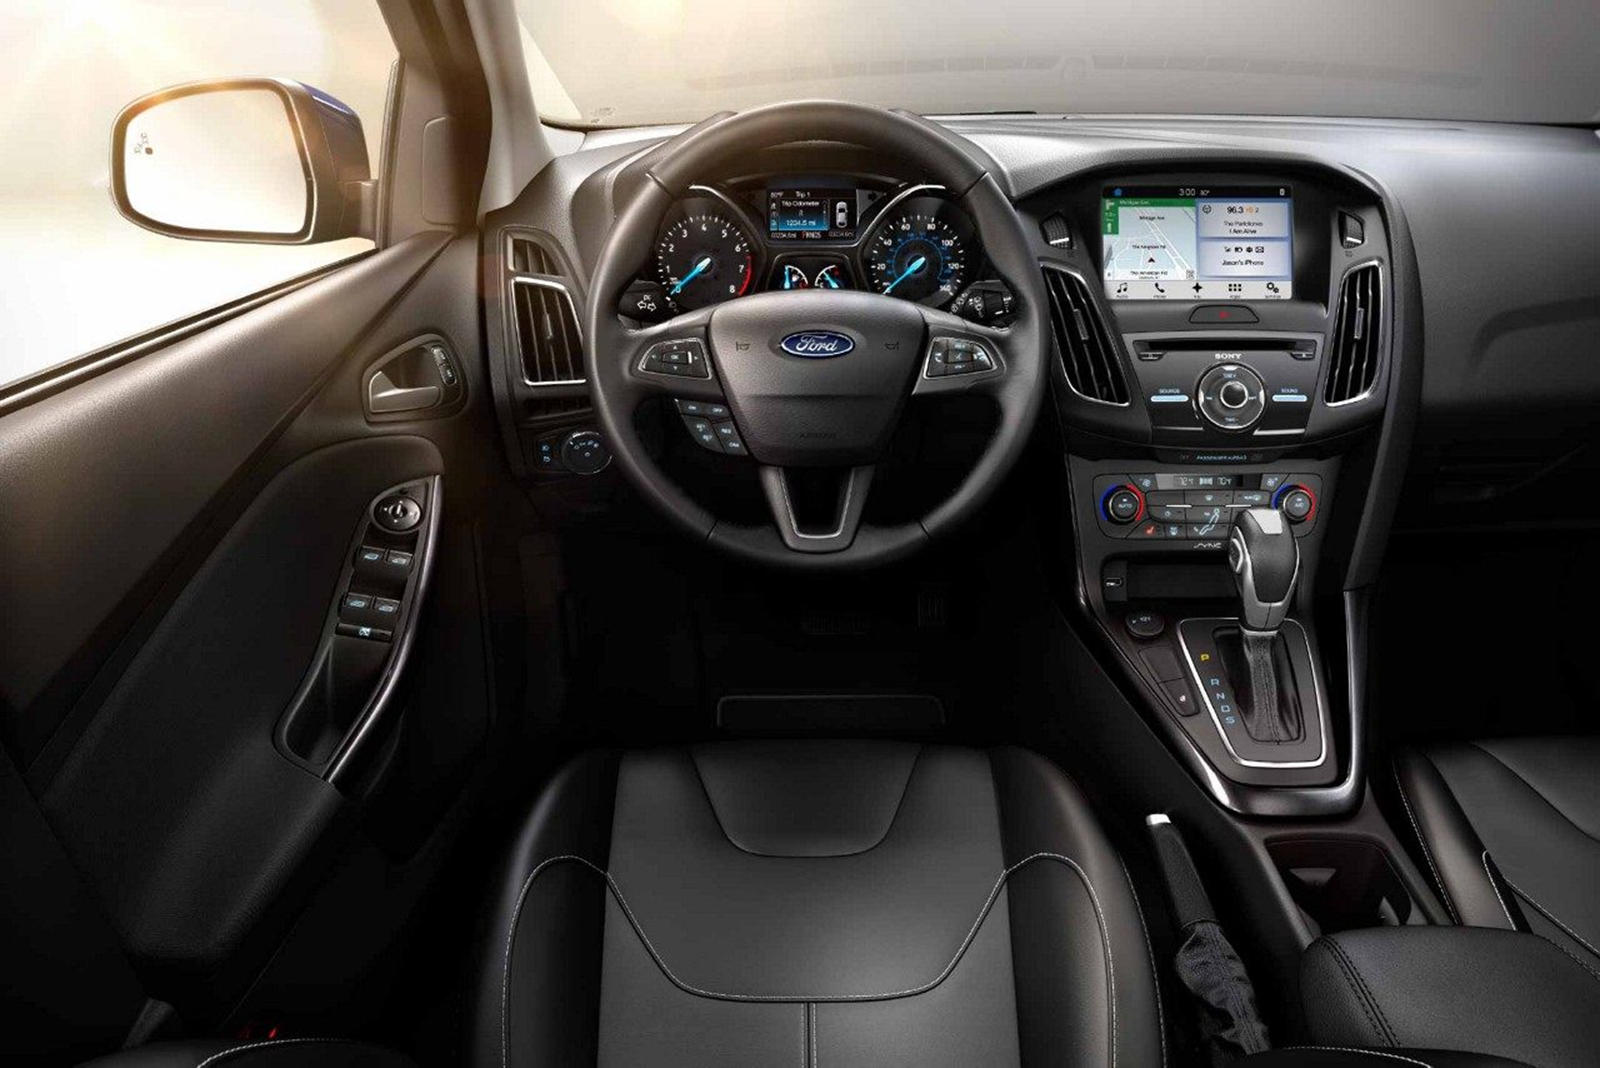 Ford Focus Review, For Sale, Colours, Models, Interior & News